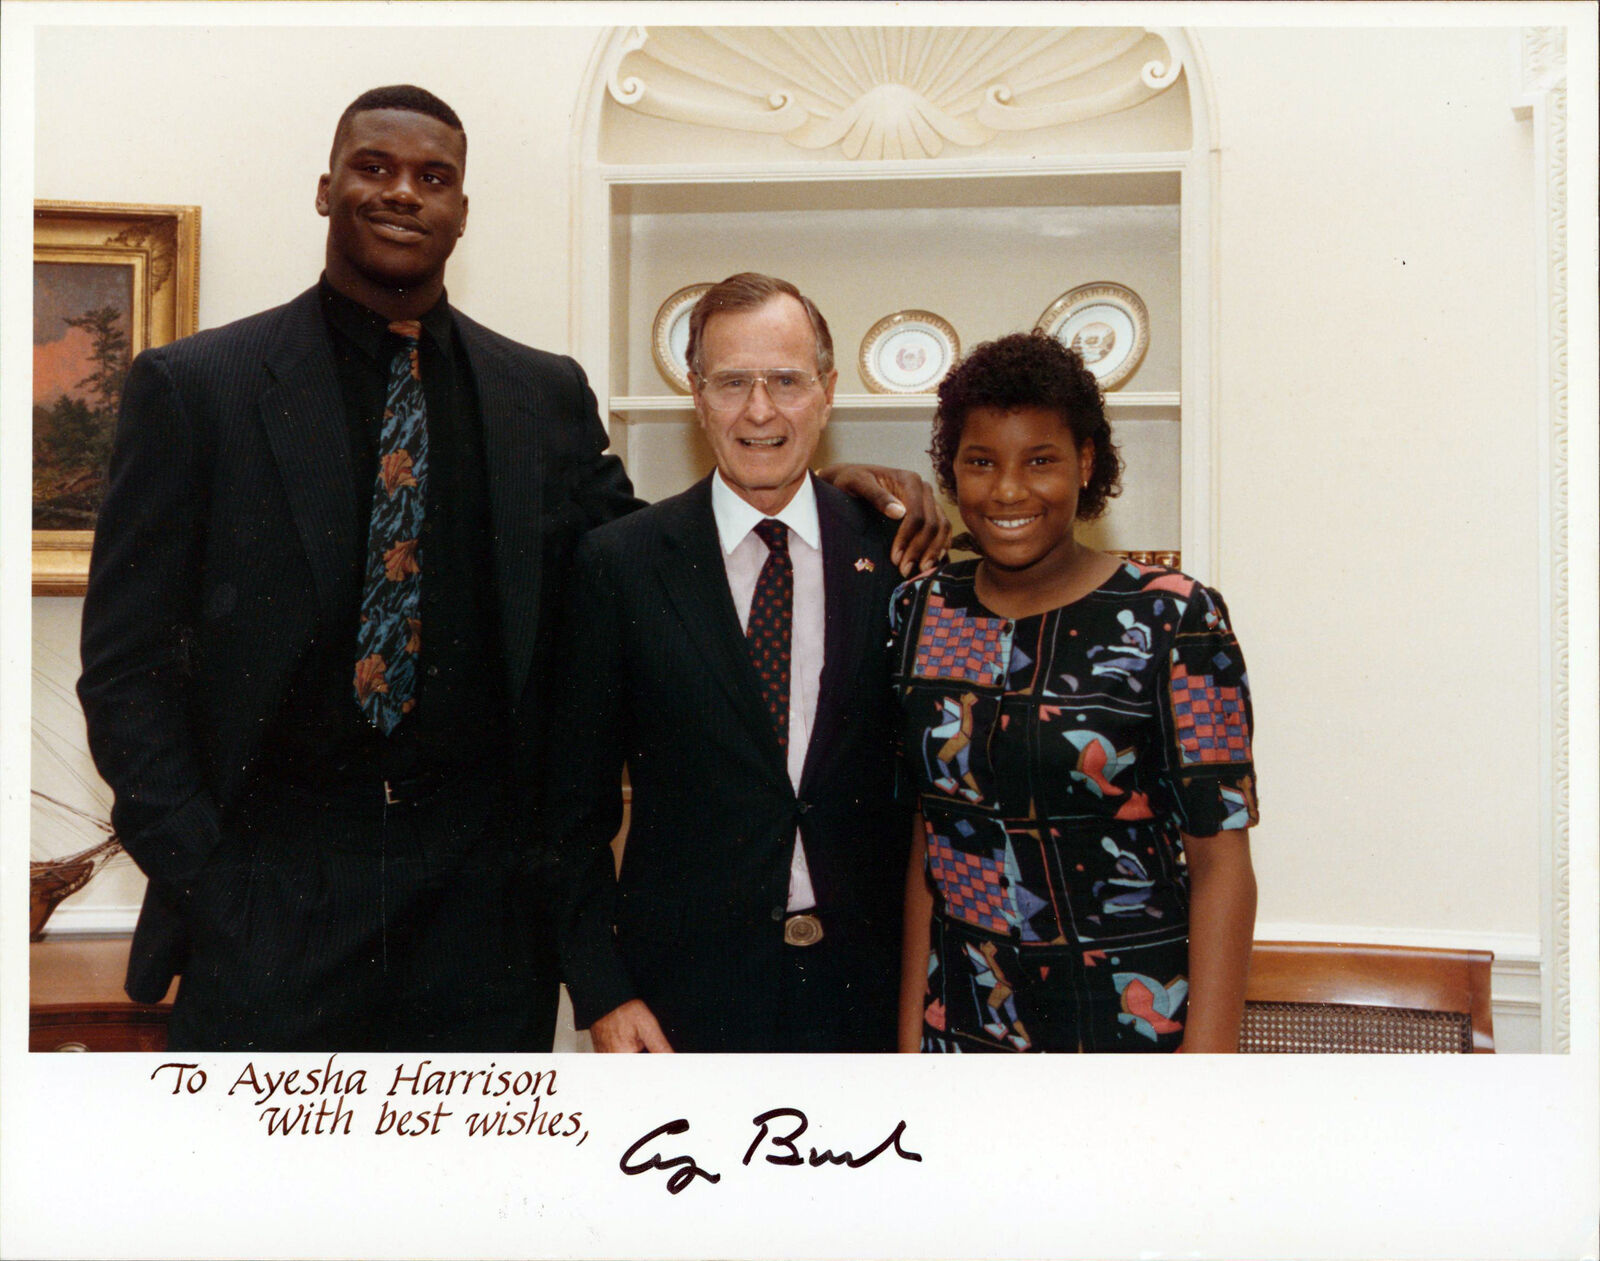 George H.W. Bush Signed 8x10 White House Photo Poster painting w/ Shaquille O'Neal & Sister BAS